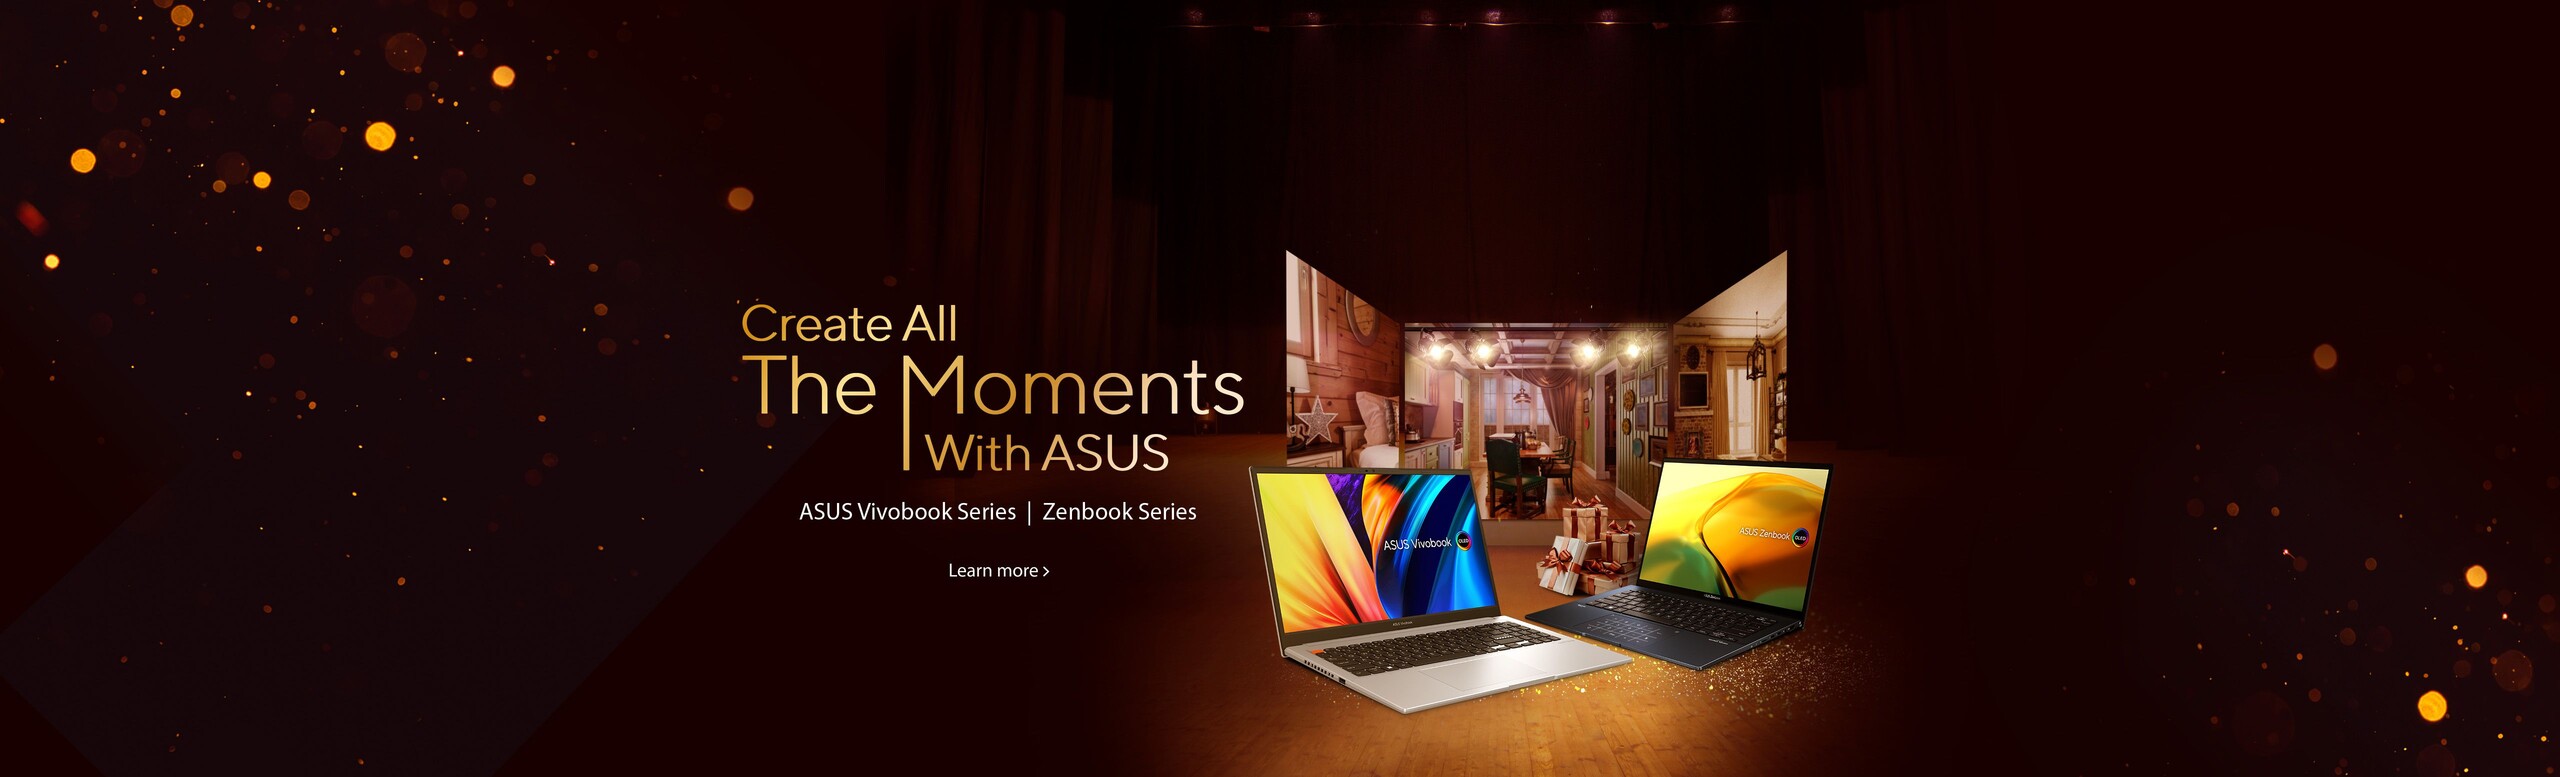 Create All the Moments With ASUS Intel Evo Laptops | ASUS Vivobook Series | Zenbook Series Vivobook Laptop and Zenbook laptop in picture.  Learn More